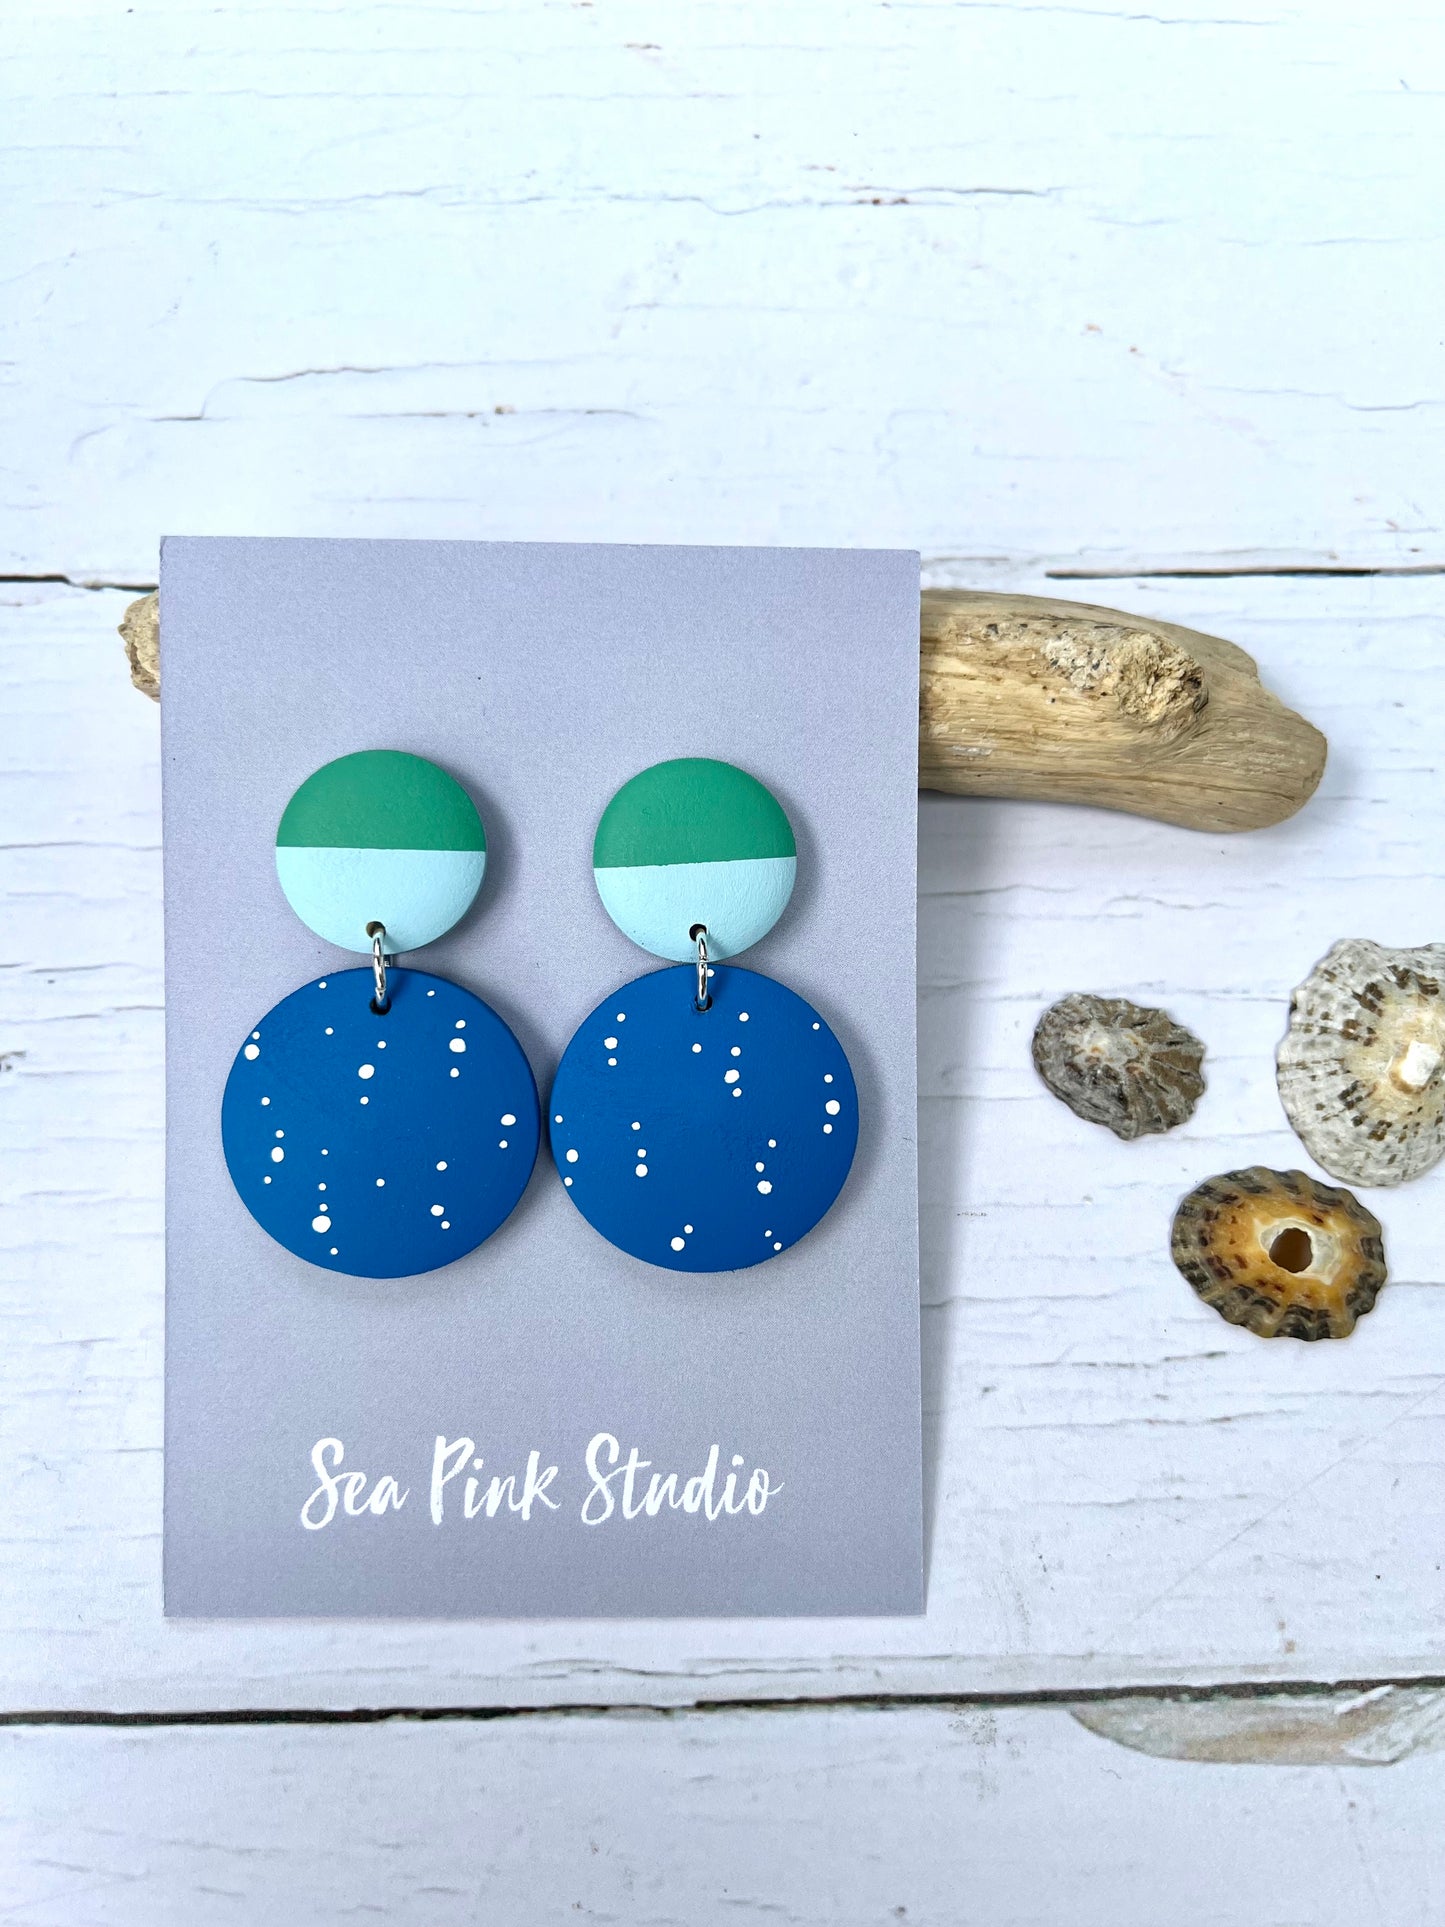 Handpainted blue earrings with white spots and green tops